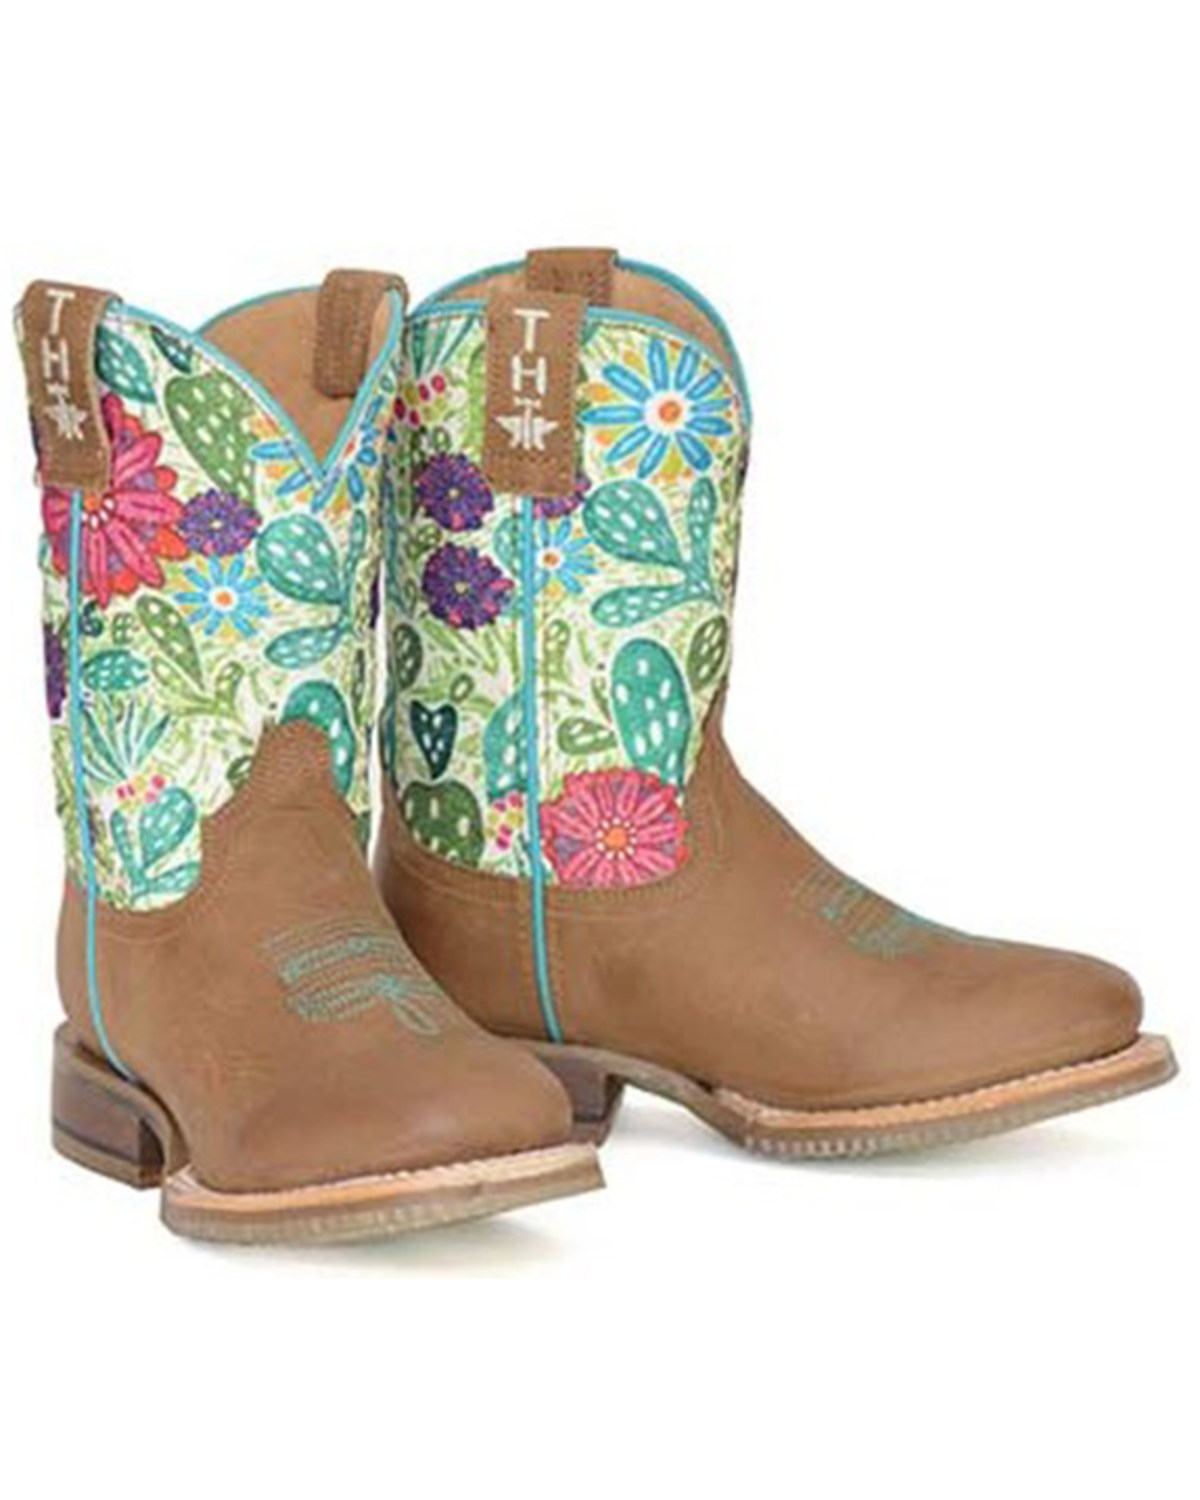 Tin Haul Little Girls' Sparkles Western Boots - Broad Square Toe